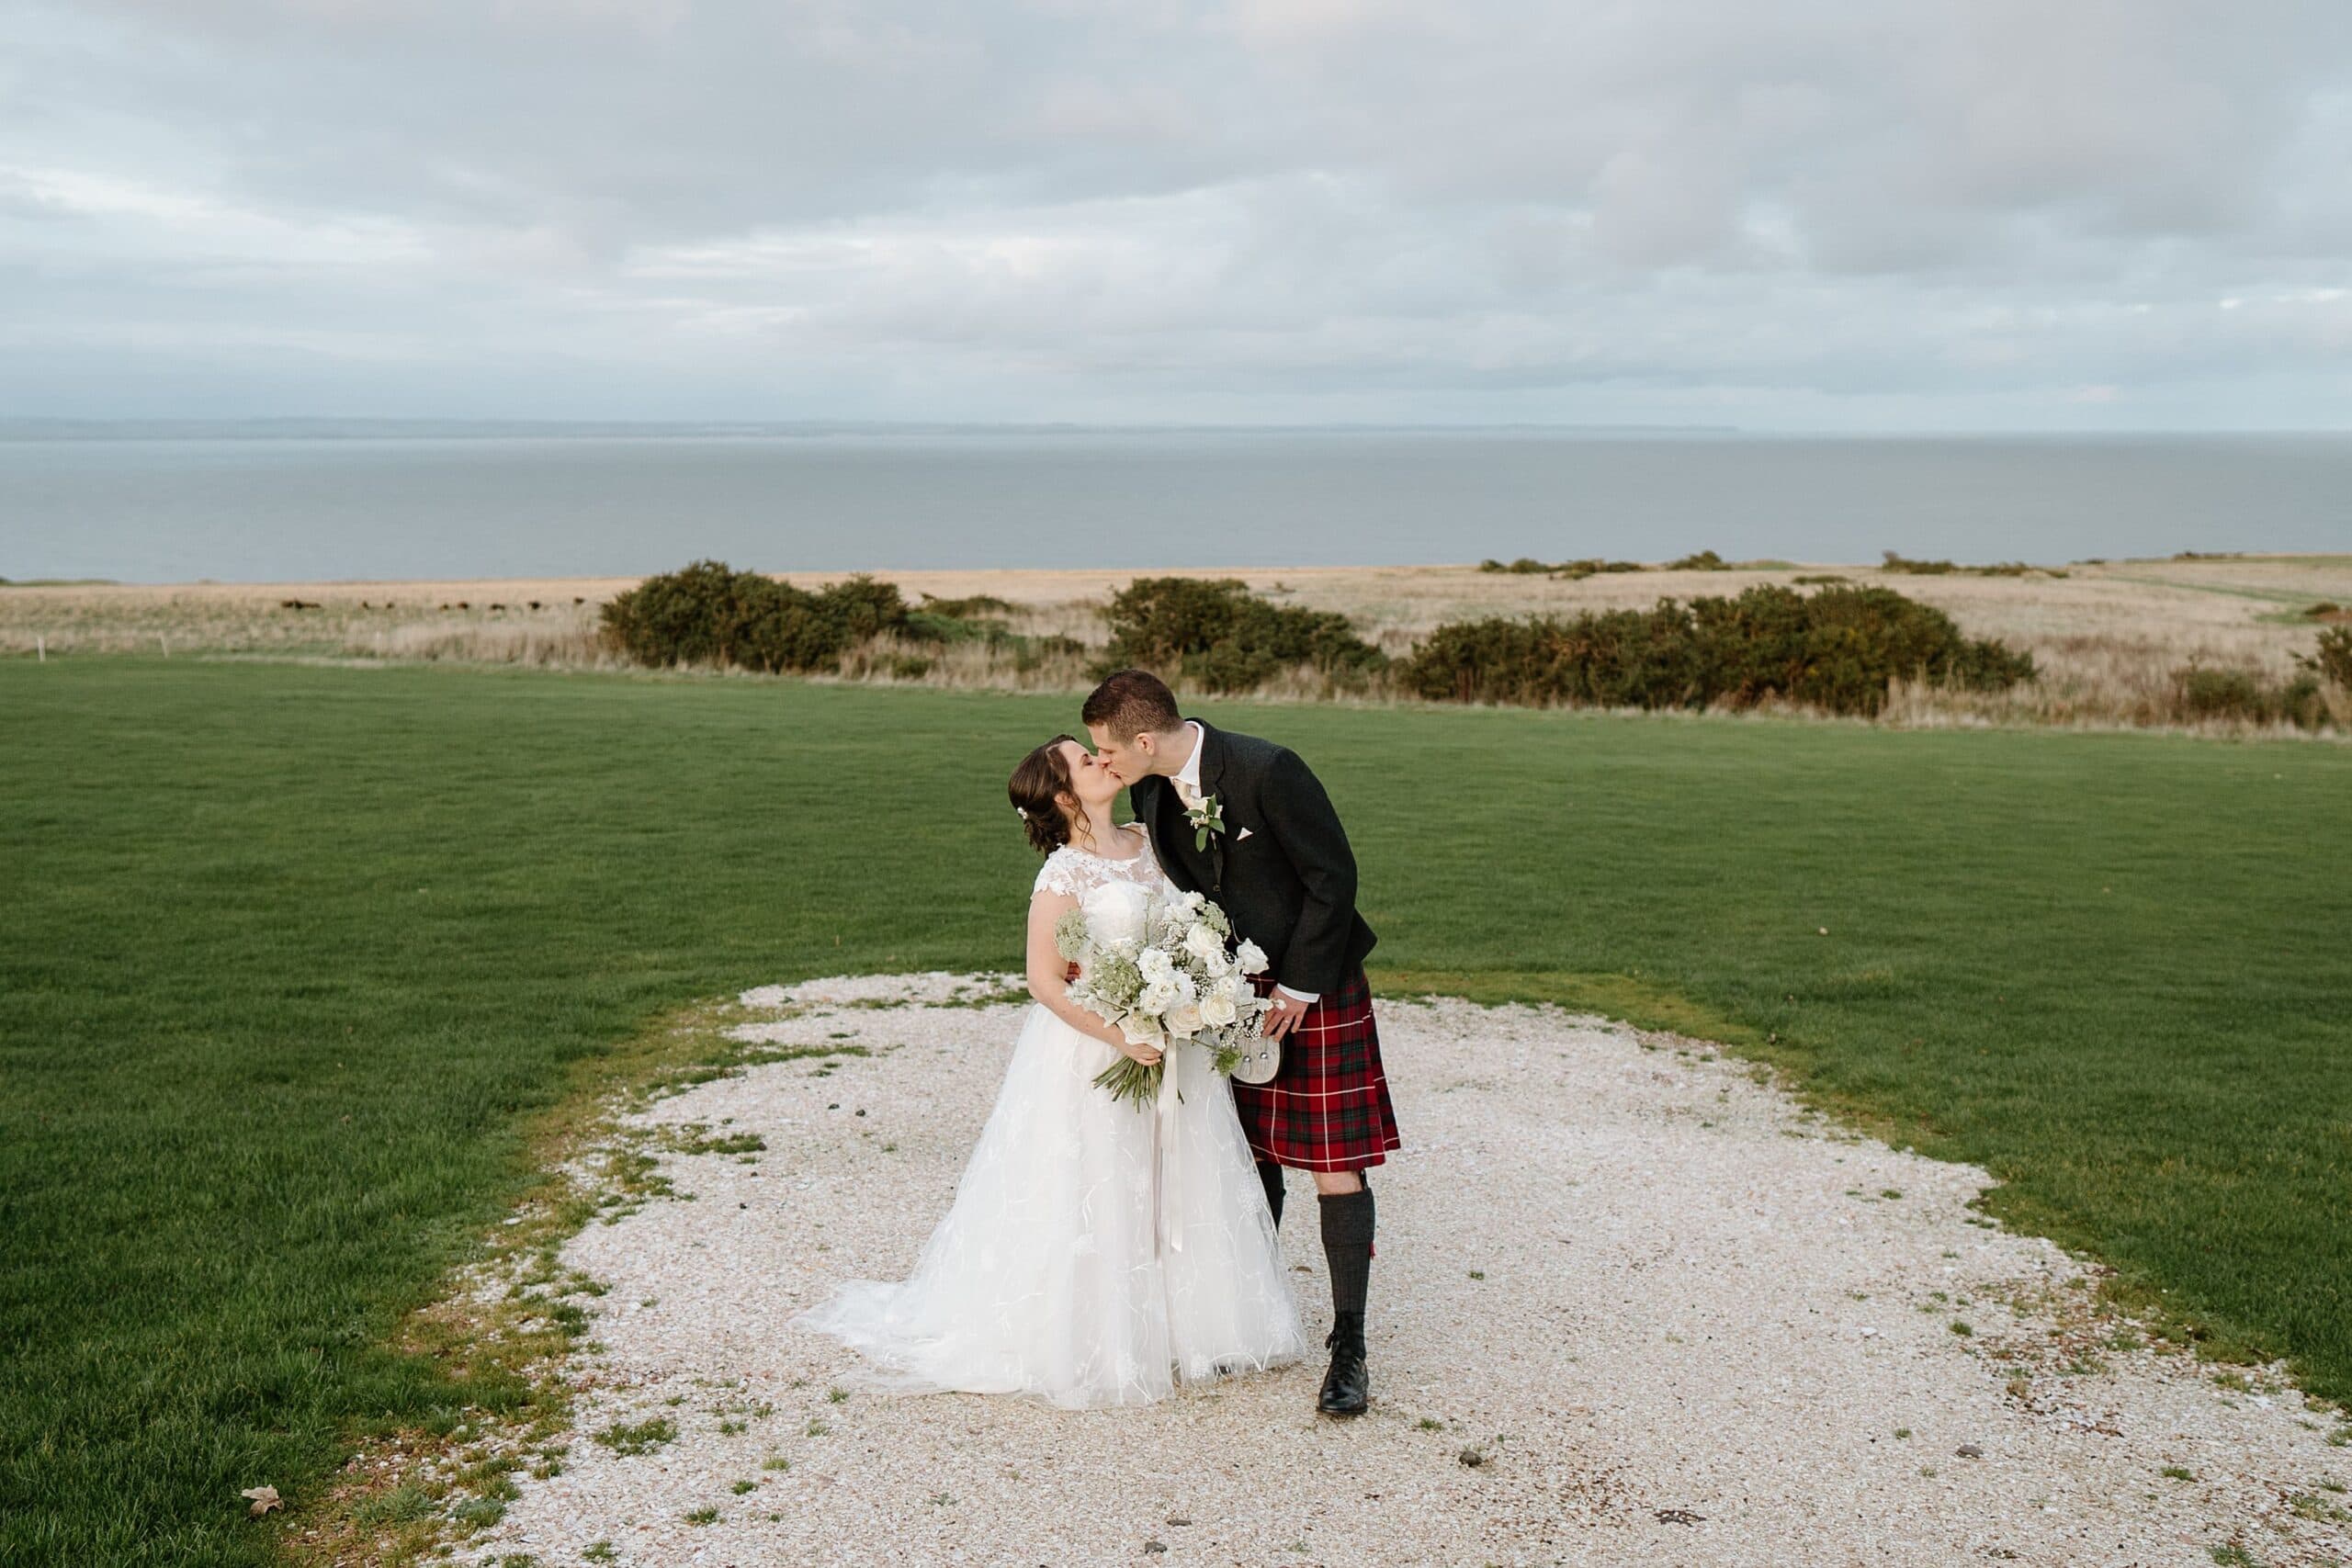 kinkell byre wedding photos of bride and groom outside venue with beach in the background